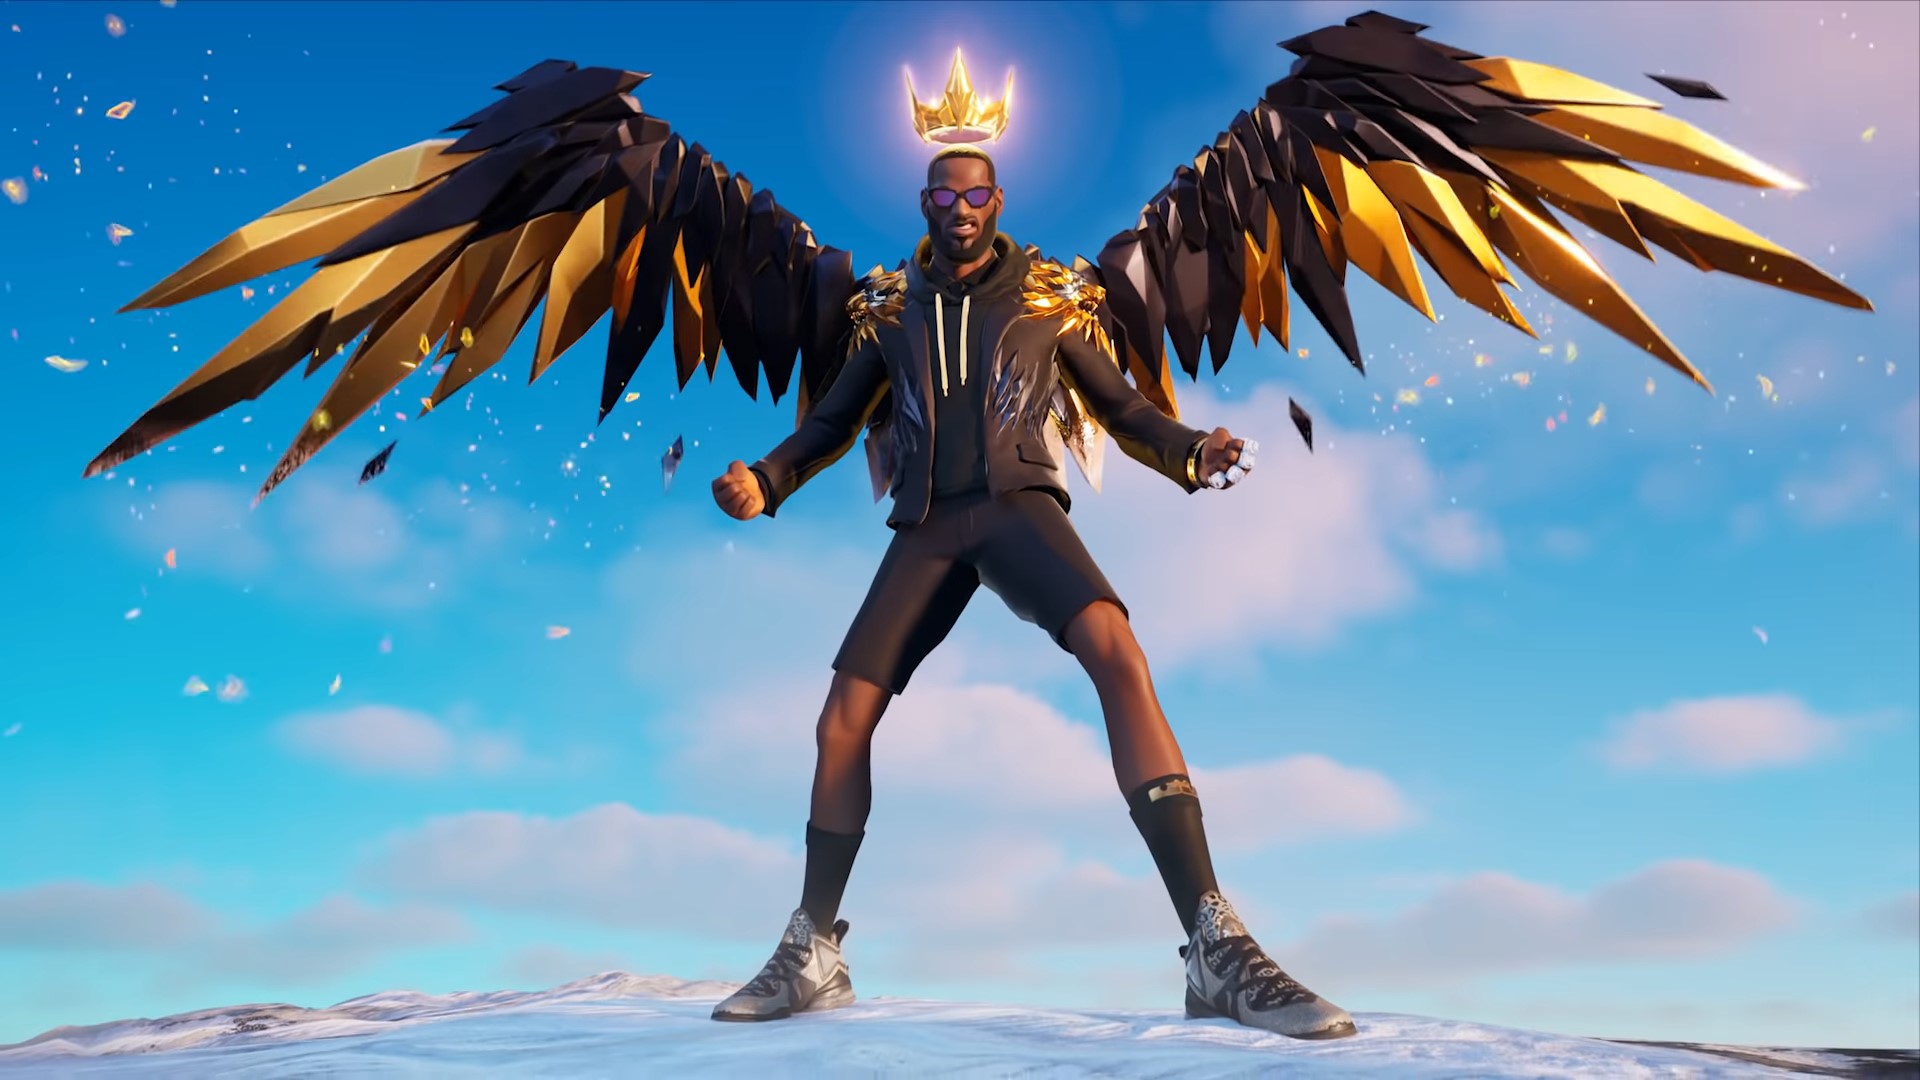 Fortnite's' New Raven Skin in Is a Fan Favorite for This Reason  Gaming  wallpapers, Best gaming wallpapers, Epic games fortnite